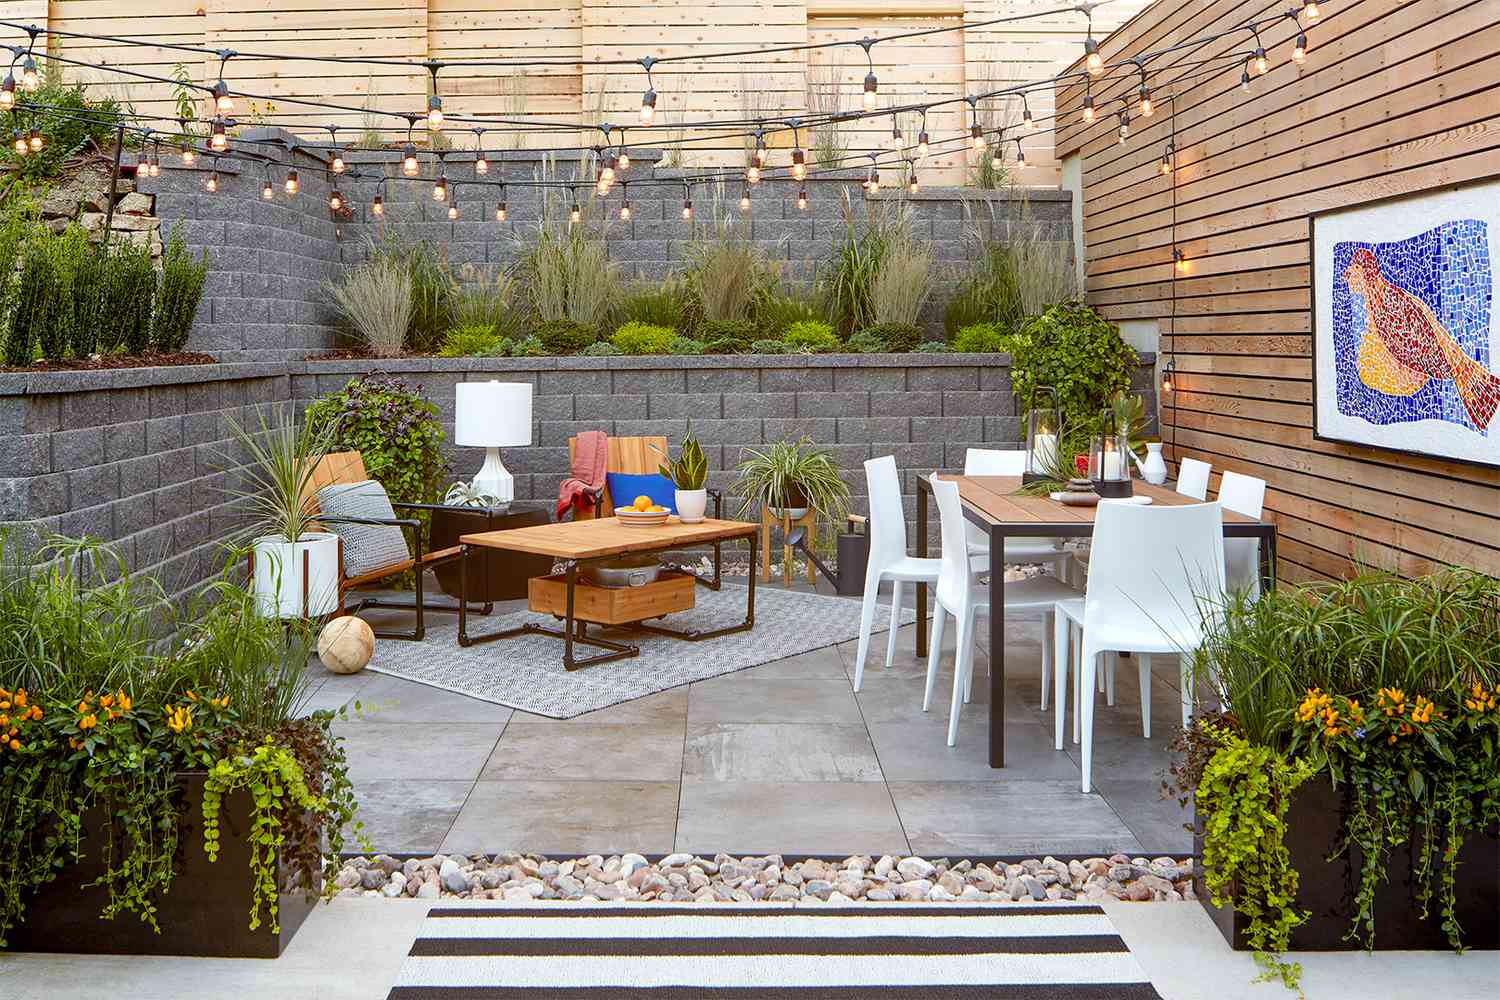 Outdoor String Lights In Your Backyard, How To Hang String Lights On Concrete